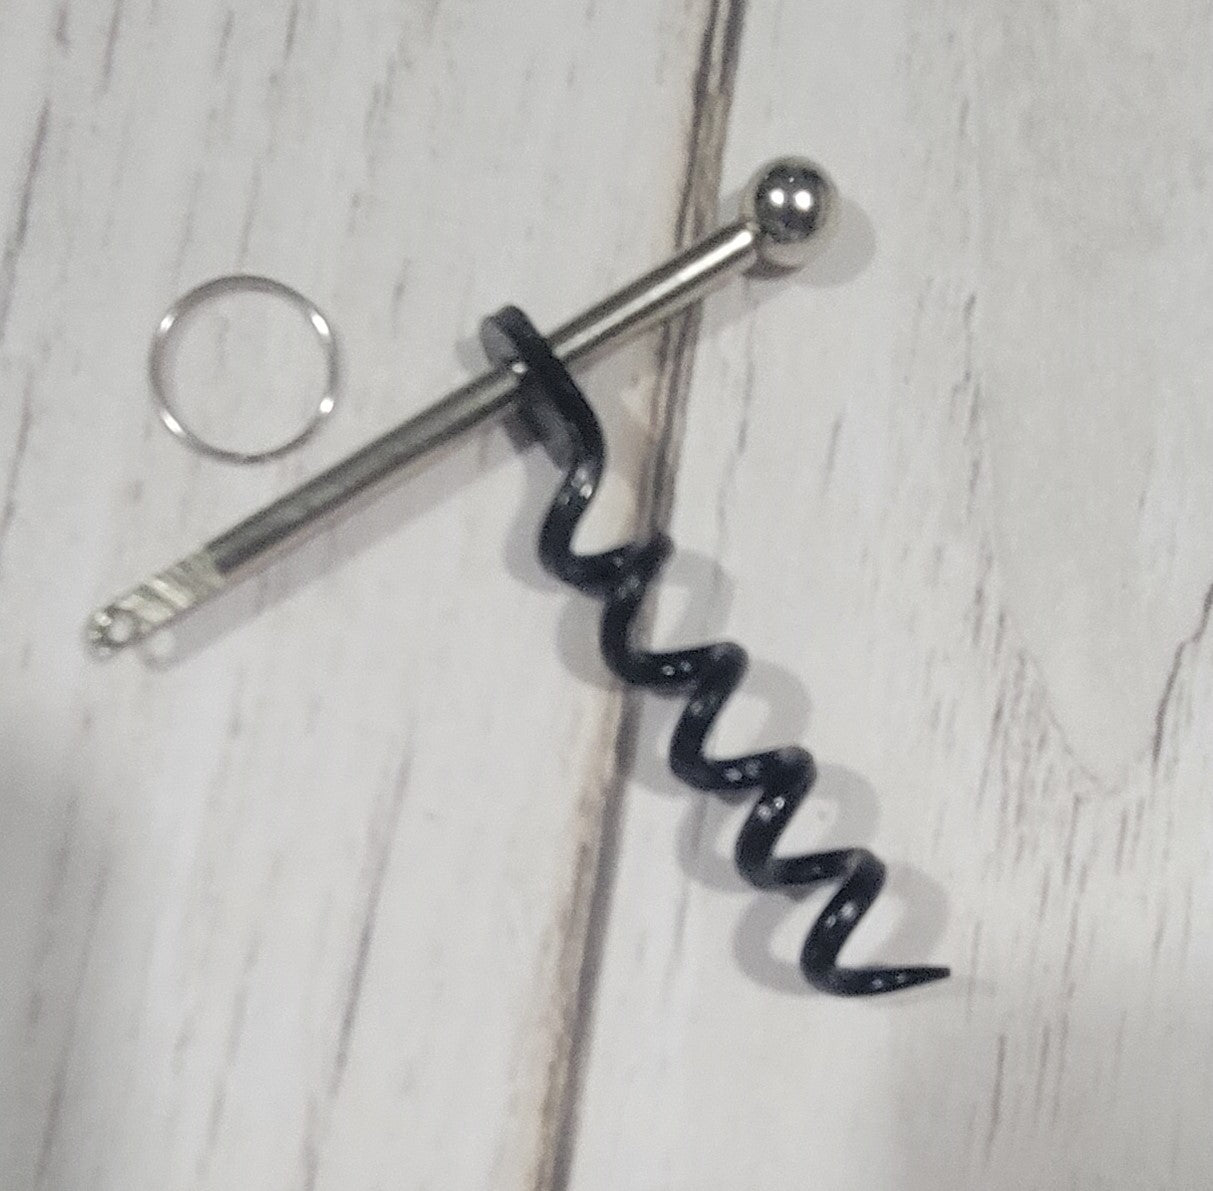 Self Defense Key Chain. Make your own. Accessories